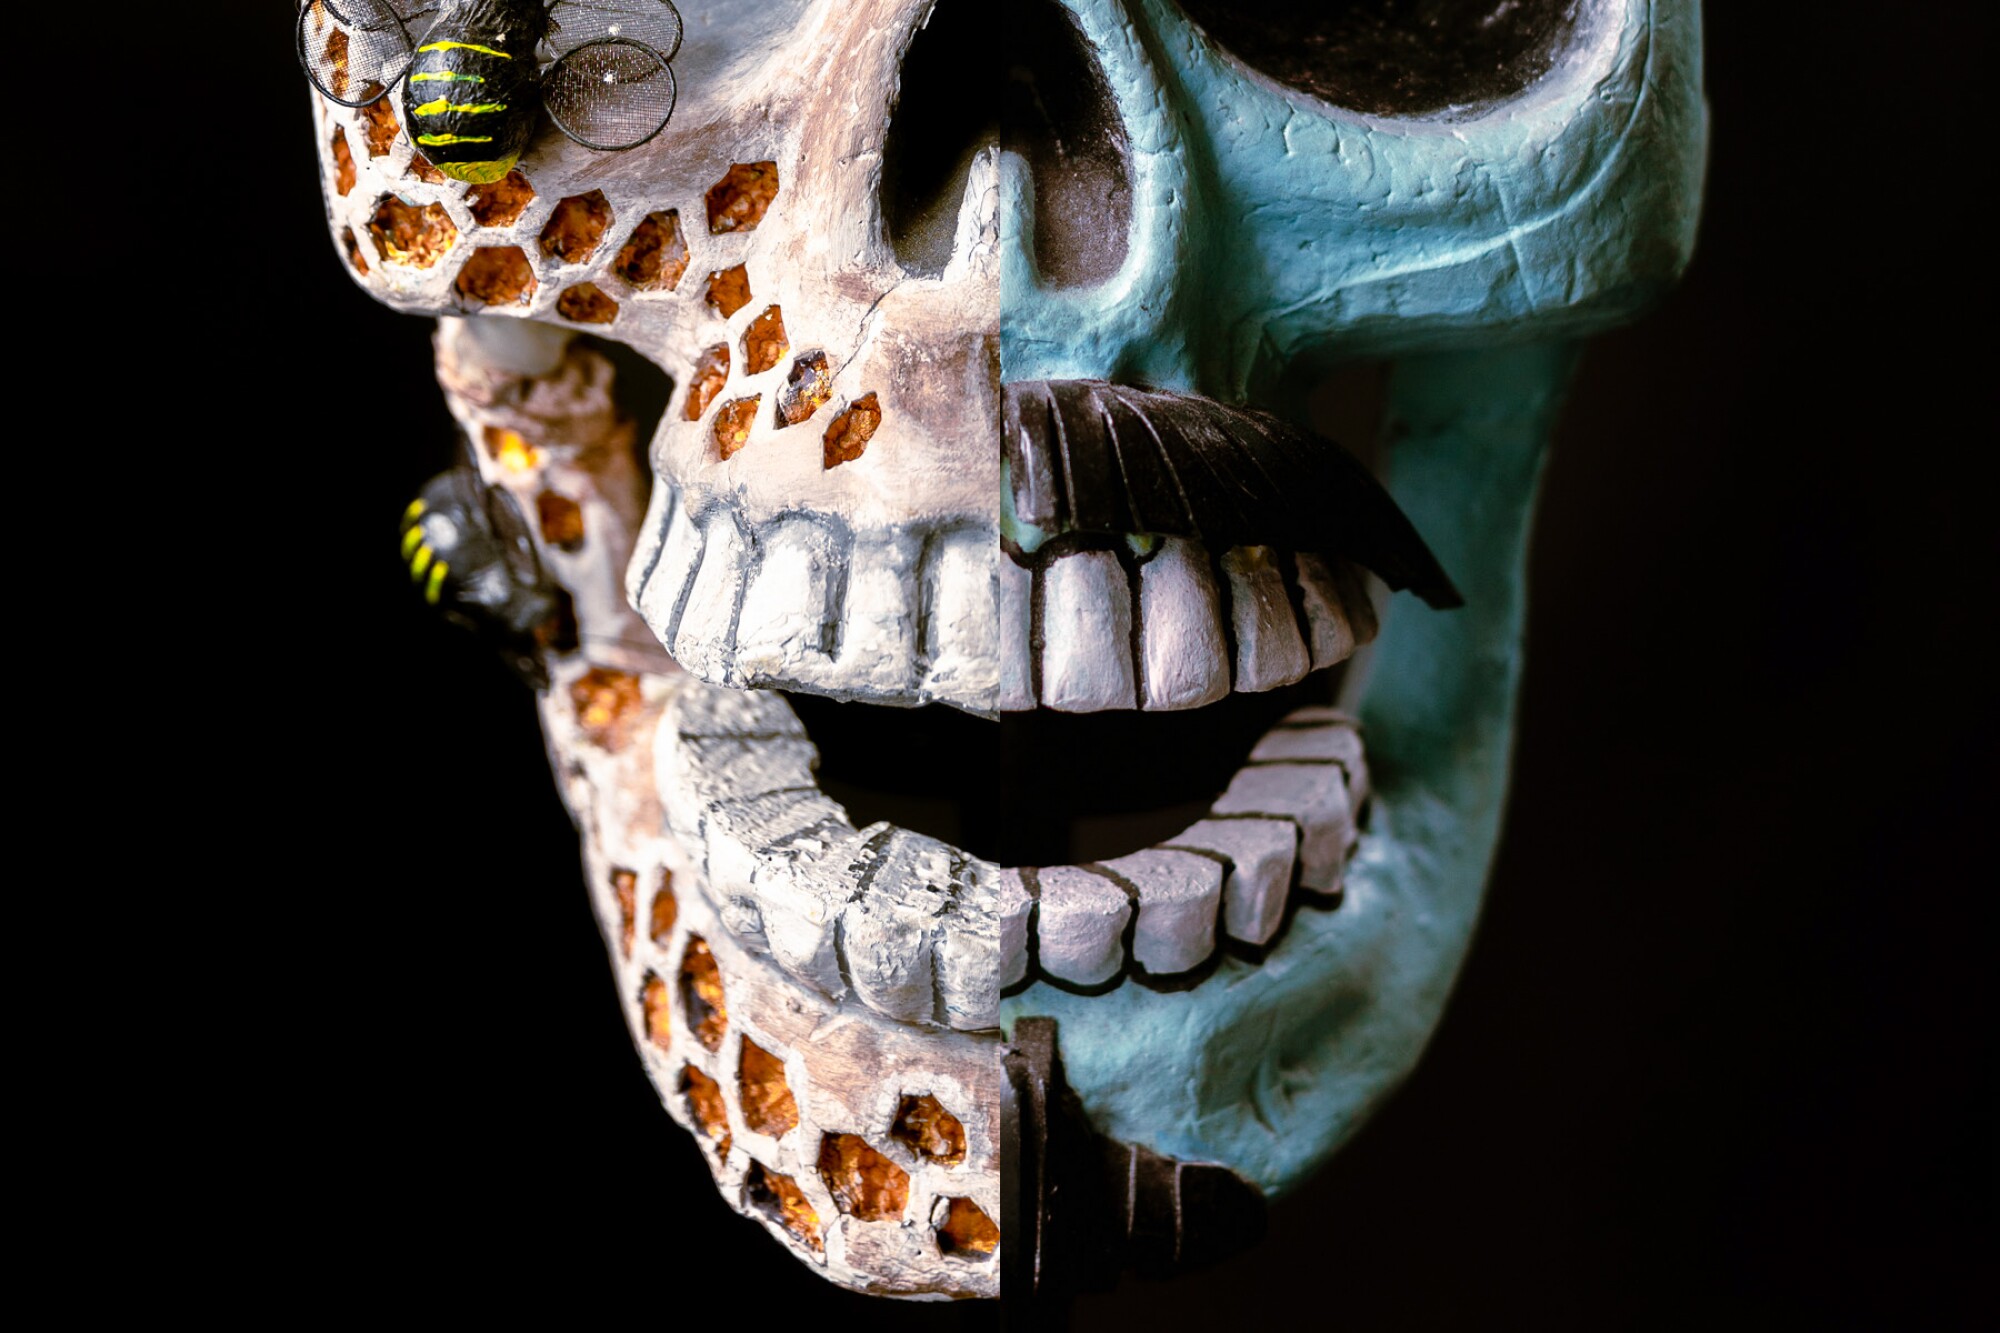 Two photos spliced into one showing the lower jaw of skull masks, one that looks like honeycomb and one that's blue.